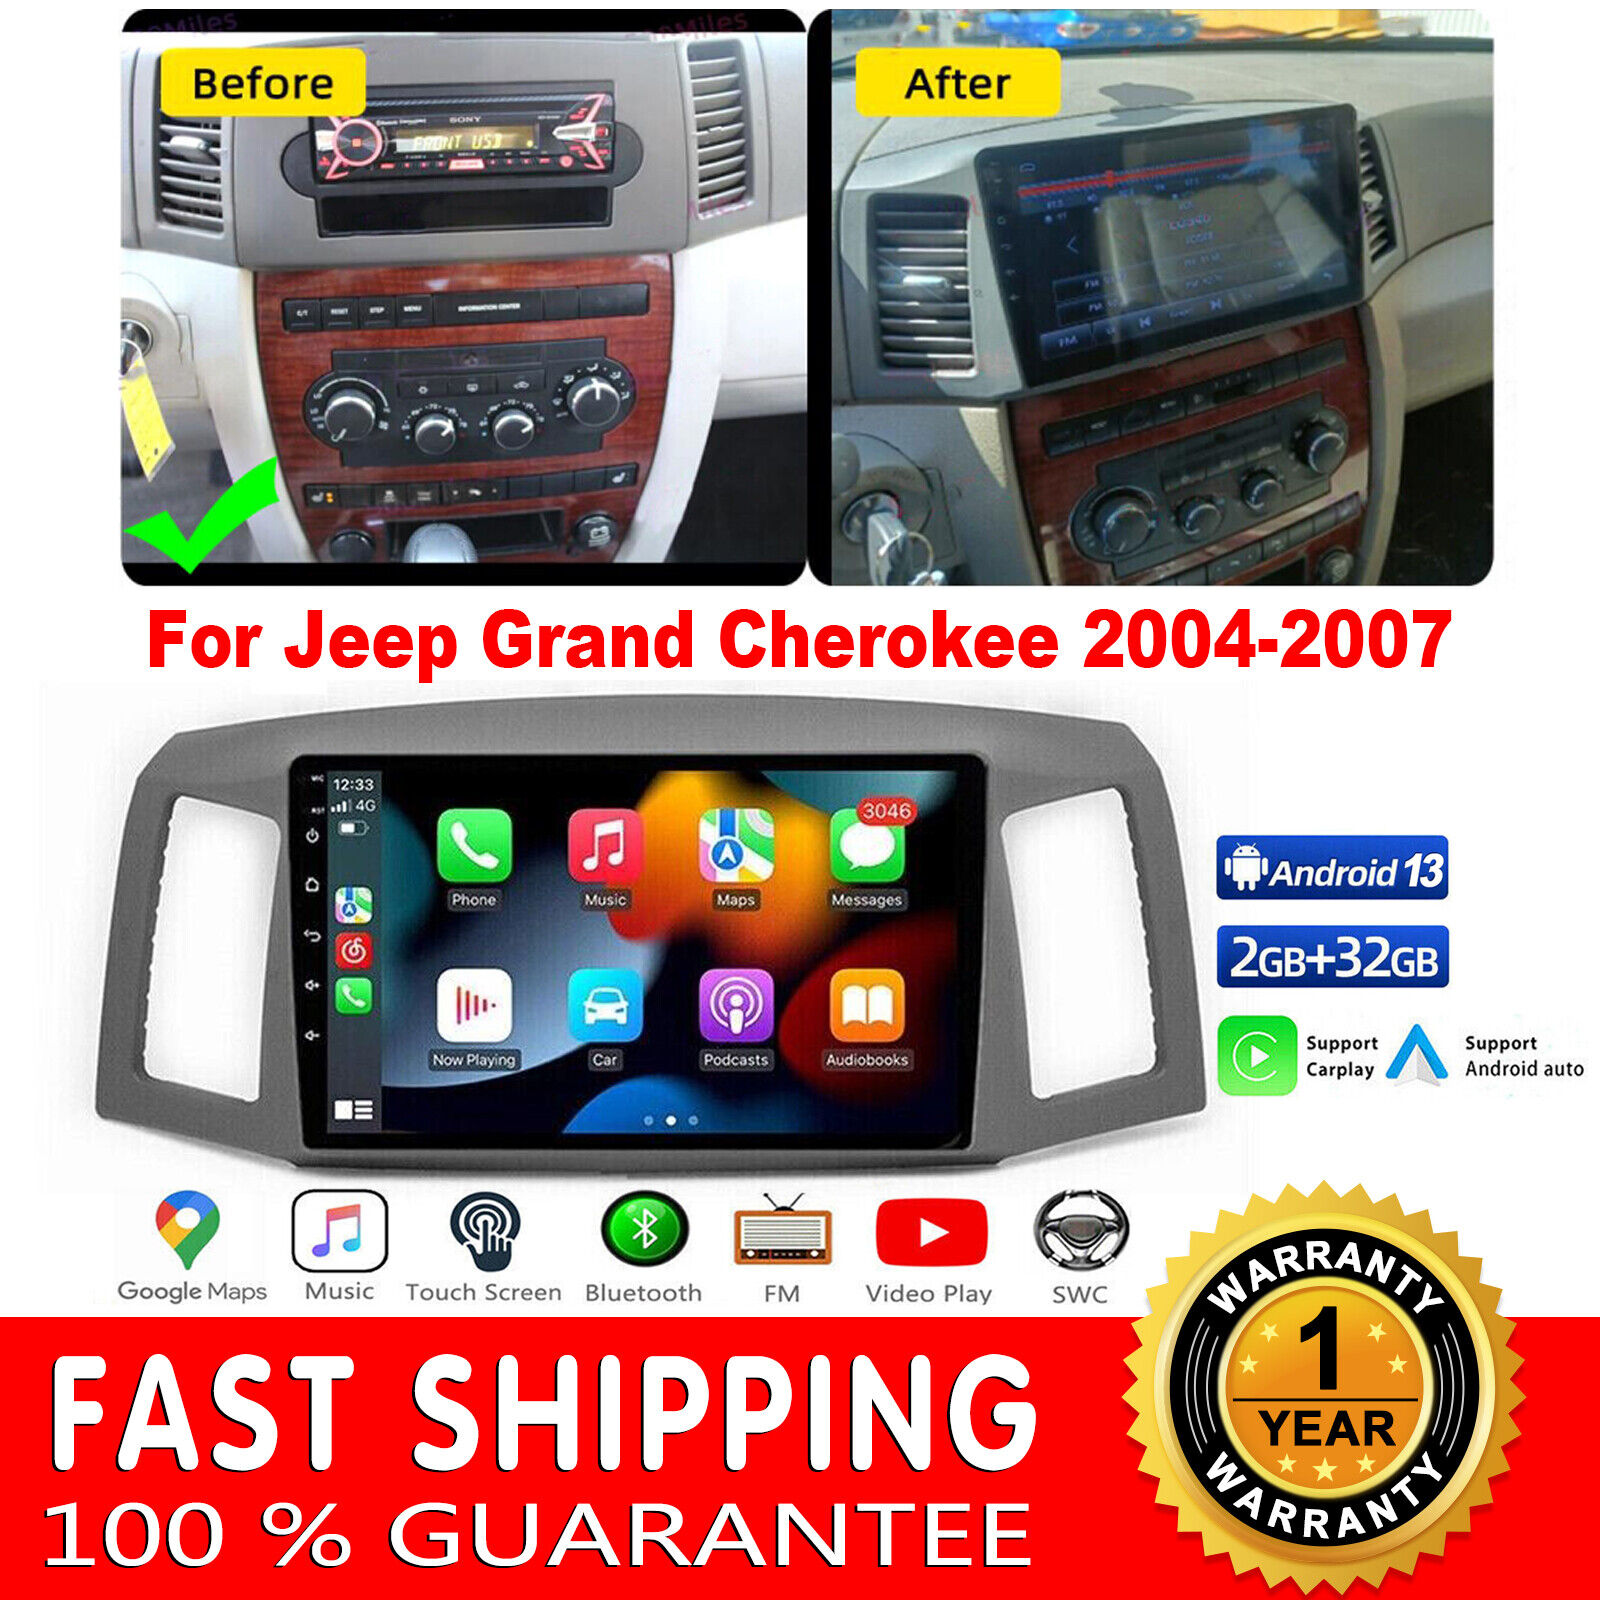 FOR 2004-2007 JEEP GRAND CHEROKEE ANDROID 13 10.1'' CAR RADIO STEREO NAVI PLAYER